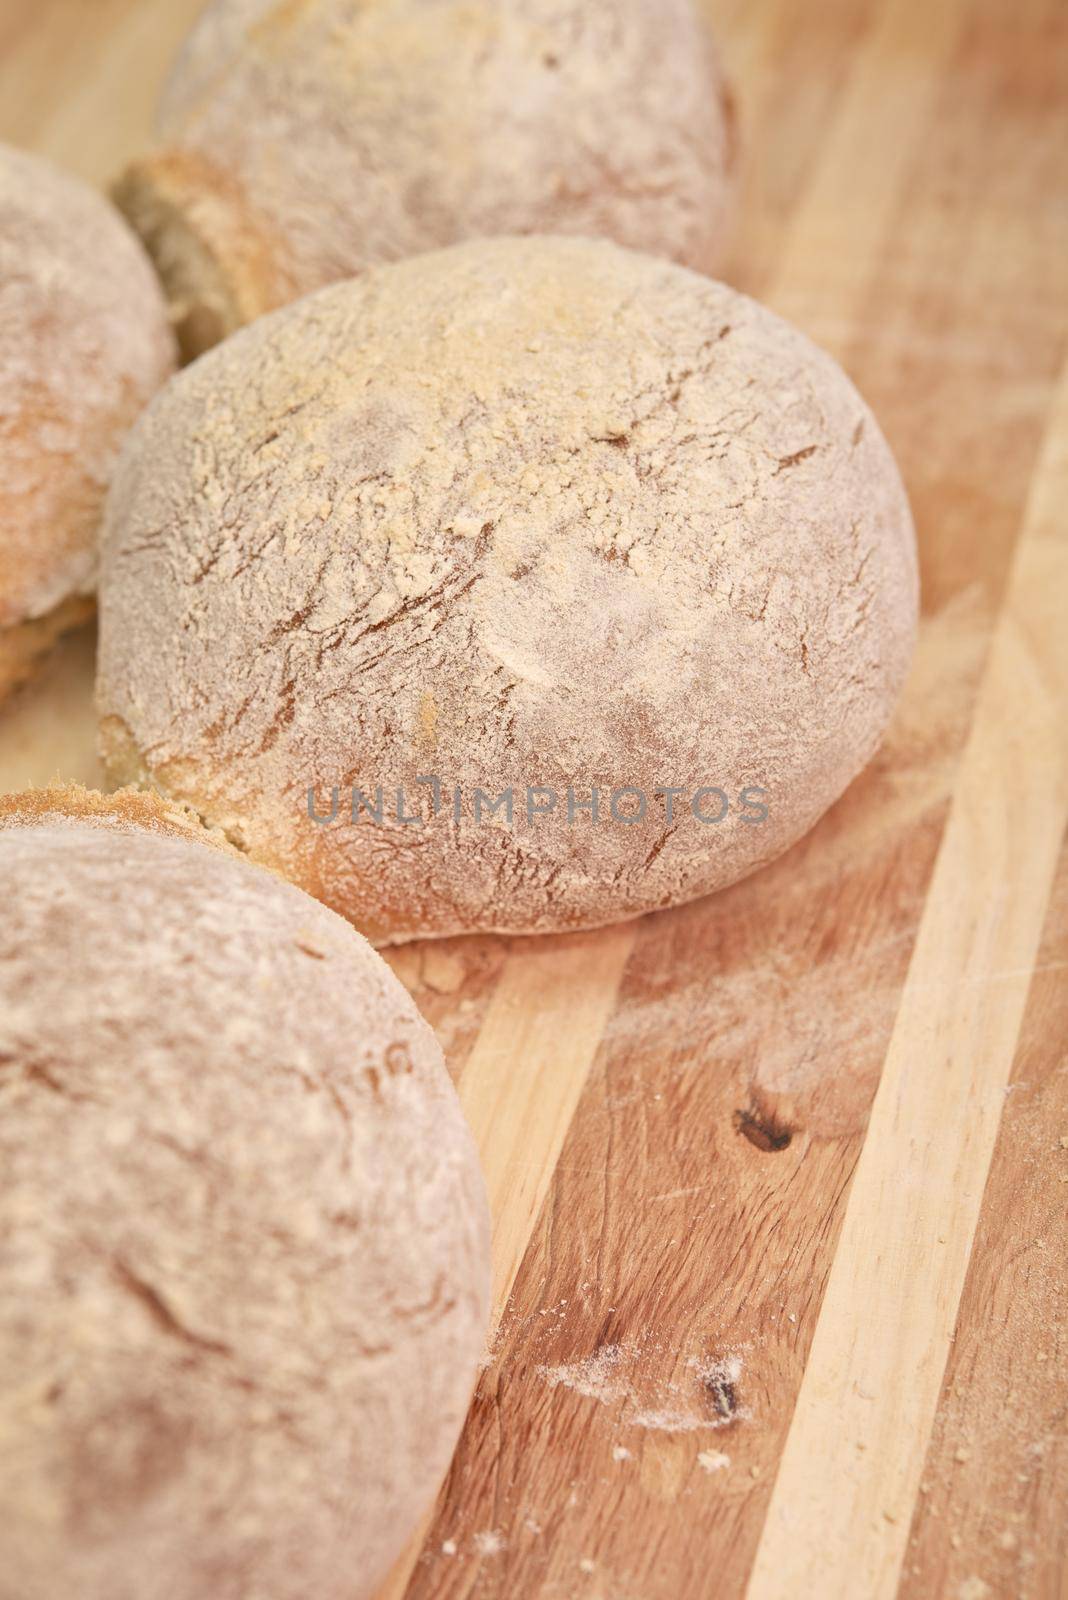 Wheat Rolls. Home-Made Wheat Rolls on Wood Board. Food Photo Collection.